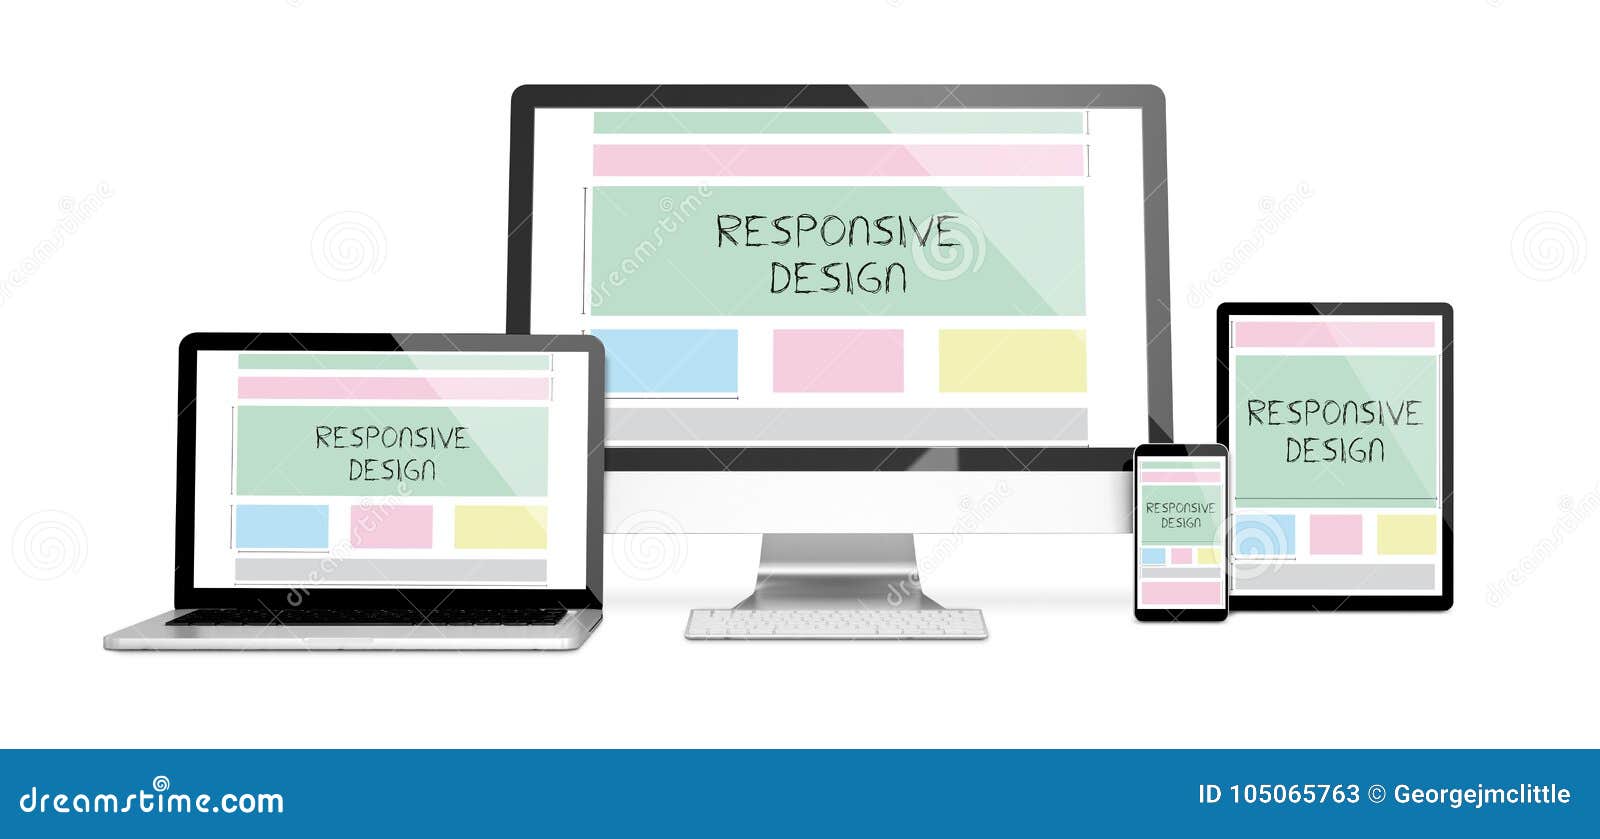 Download Devices Isolated Mockup Responsive Design Stock ...